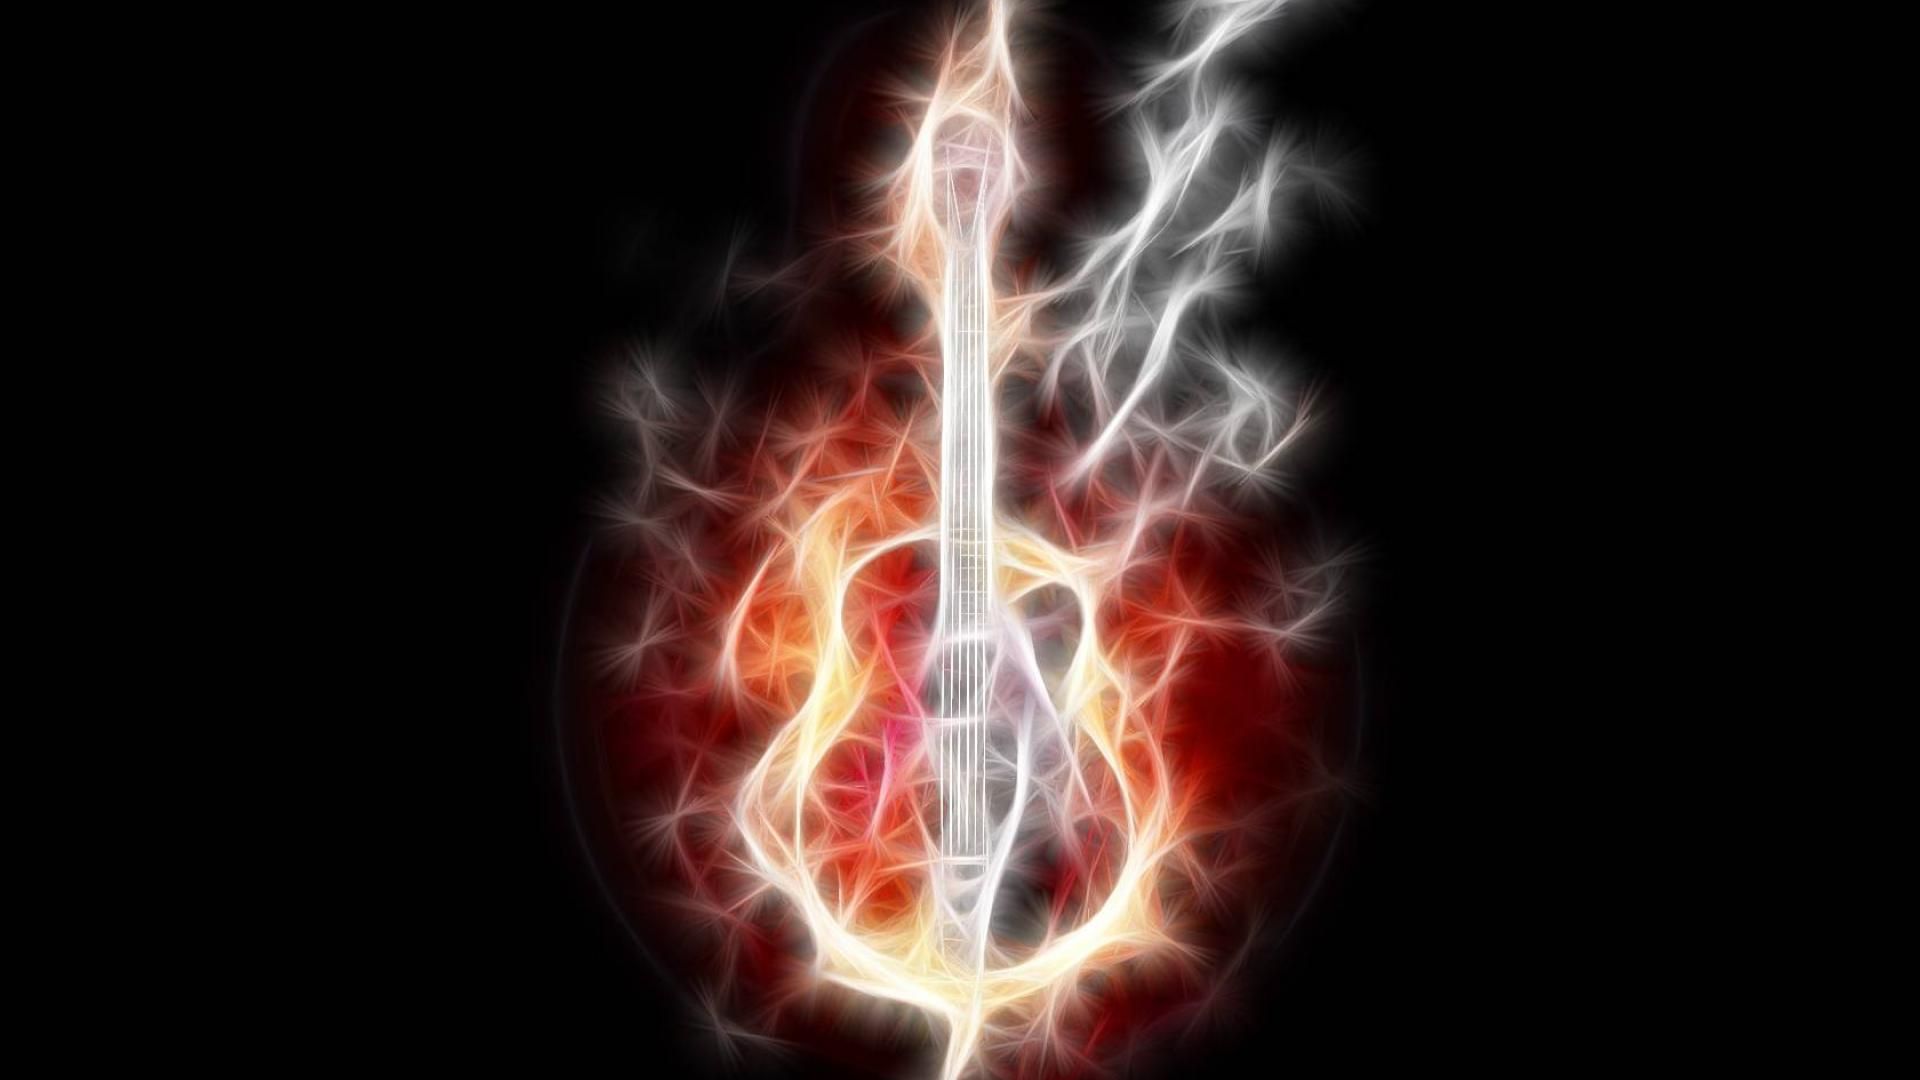 Abstract guitar wallpaper - (#111) - High Quality and Resolution ...